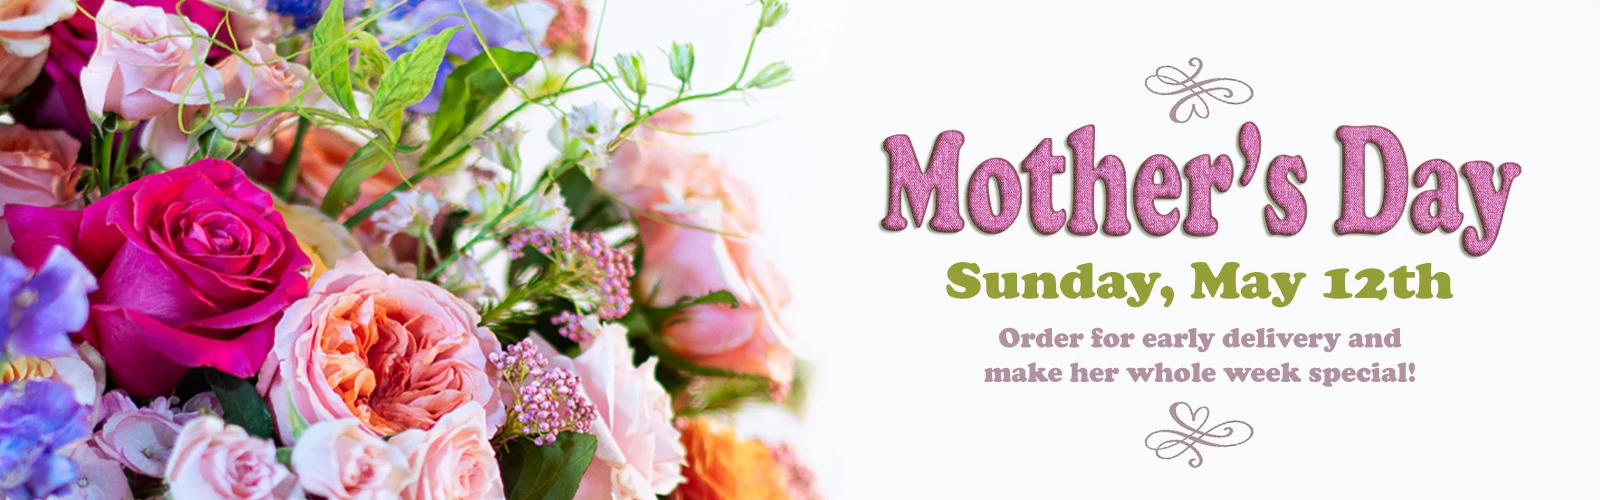 Mother's Day Flowers and Gifts delivered throughout the Dallas Texas Area